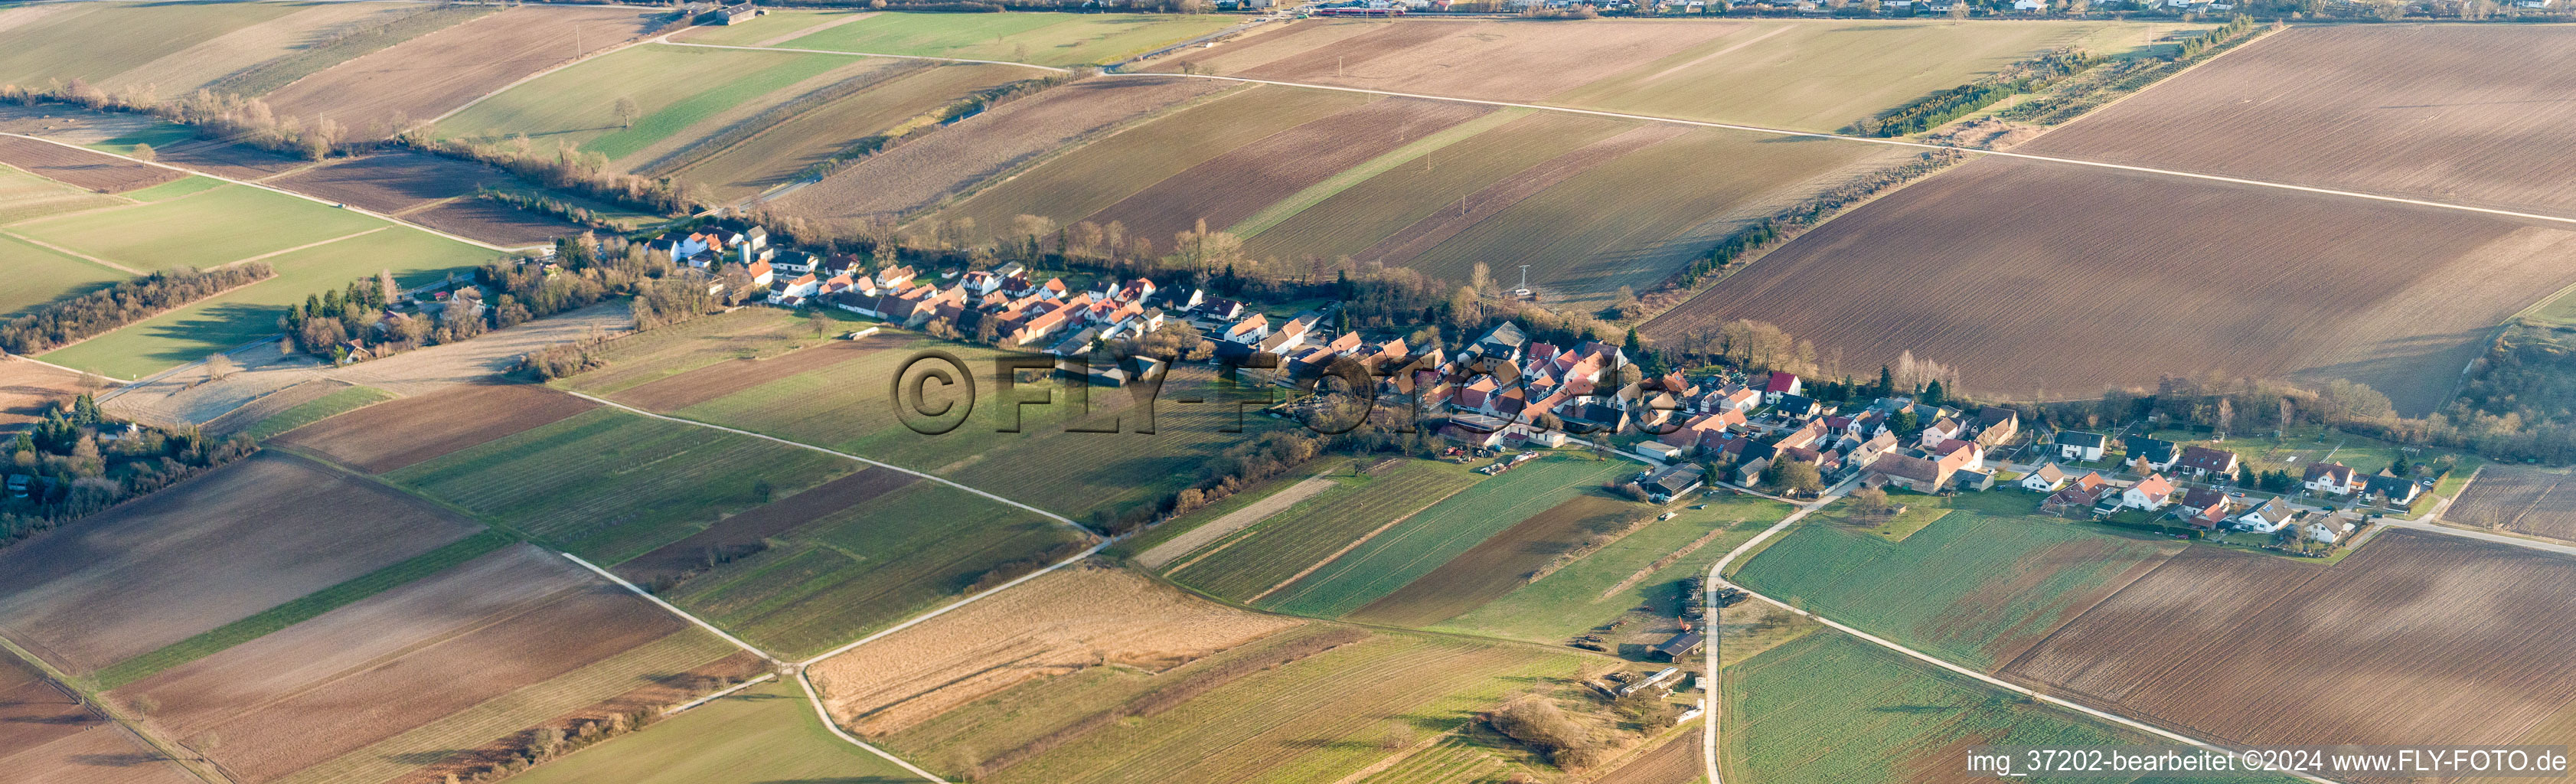 Panoramic perspective Village - view on the edge of agricultural fields and farmland in Vollmersweiler in the state Rhineland-Palatinate, Germany